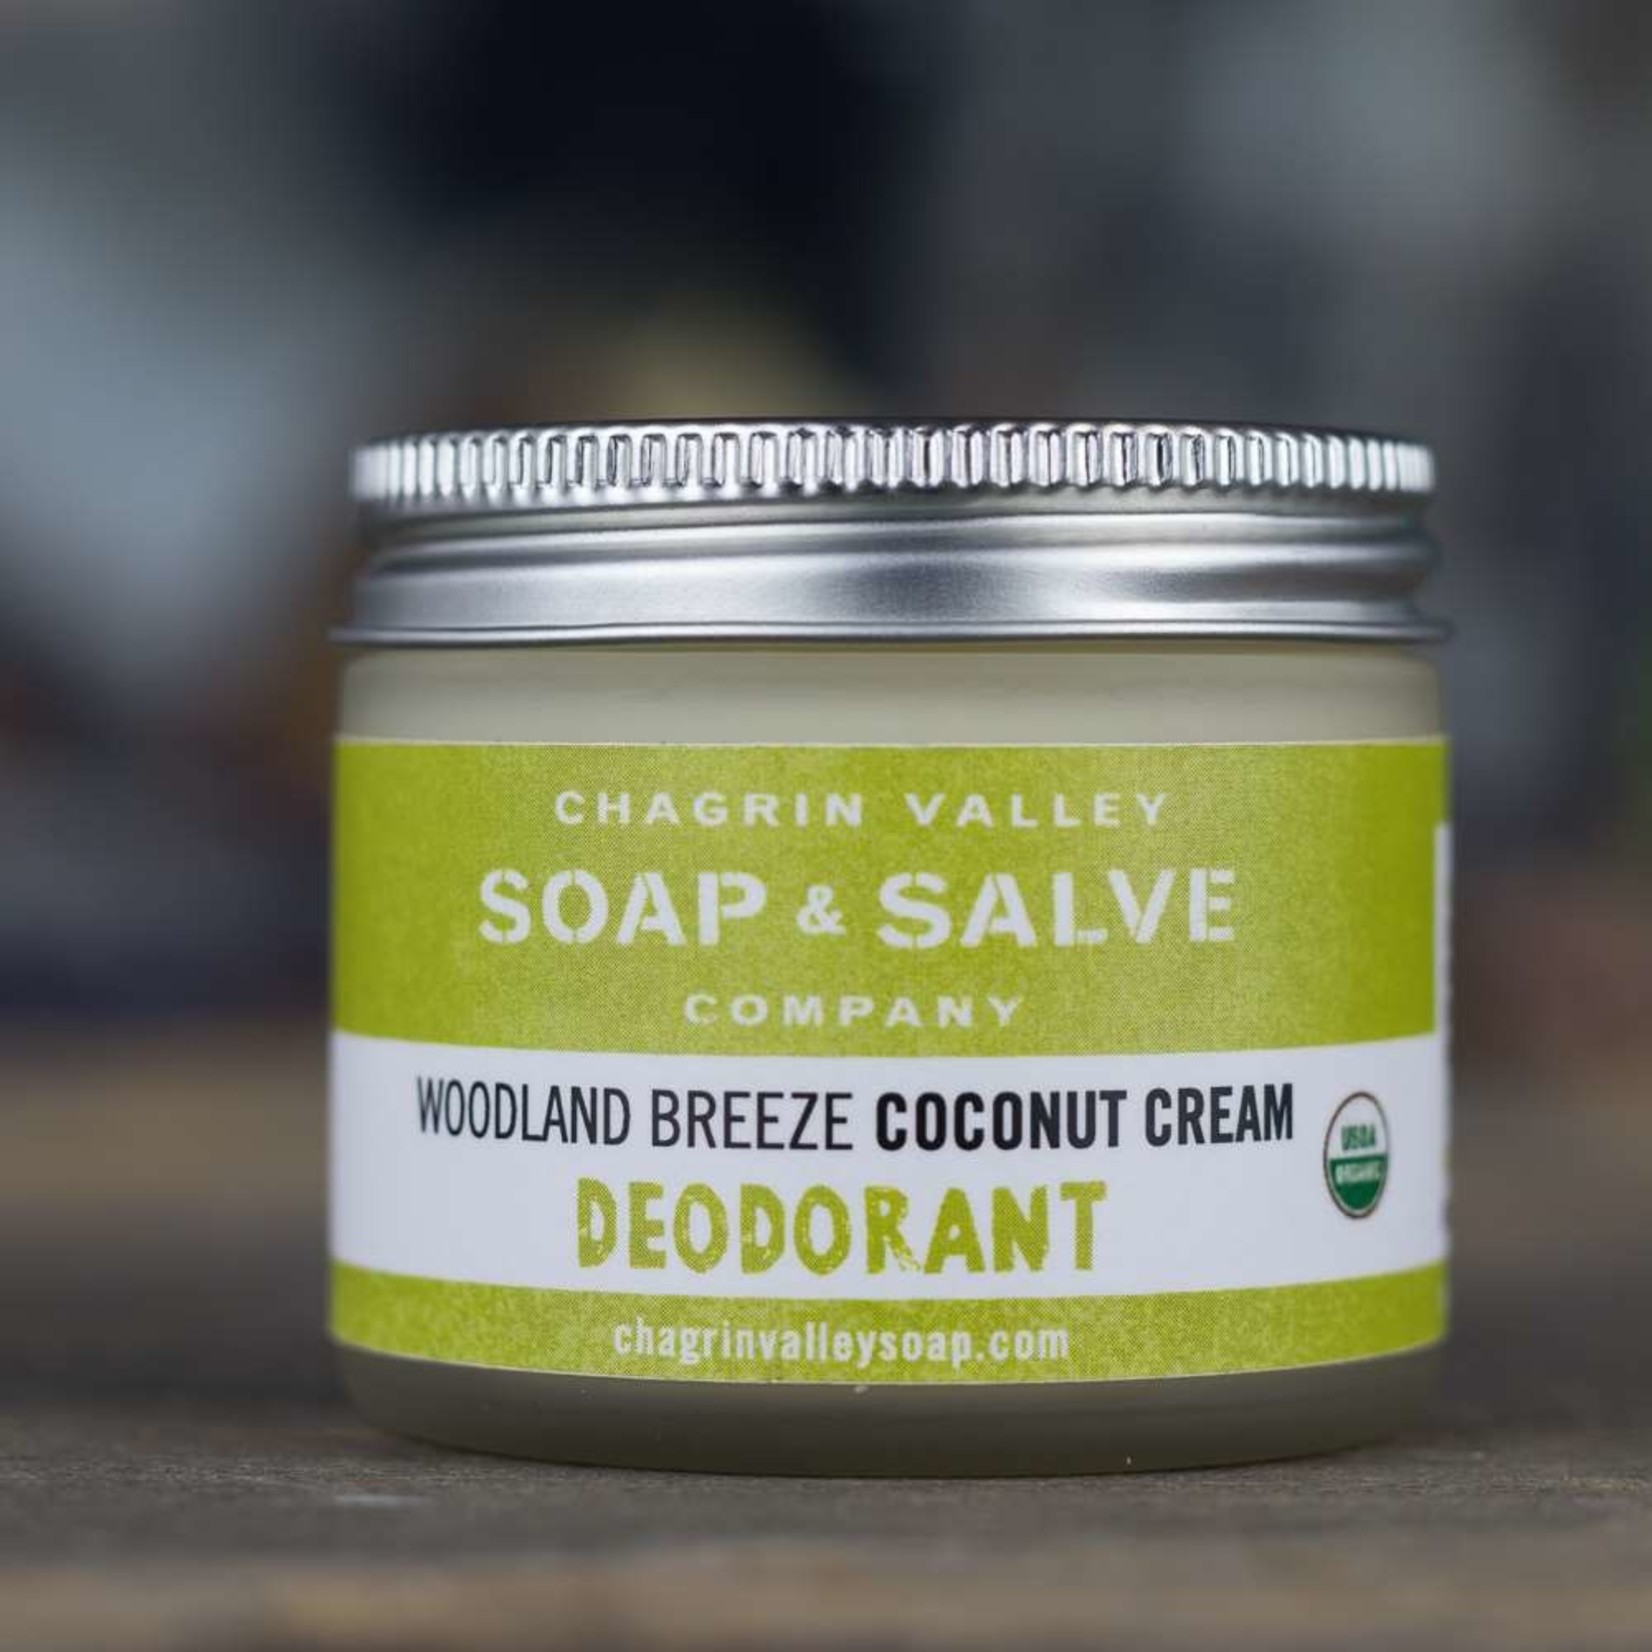 Chagrin Valley Soap and Salve Woodland Breeze Coconut Cream Deodorant